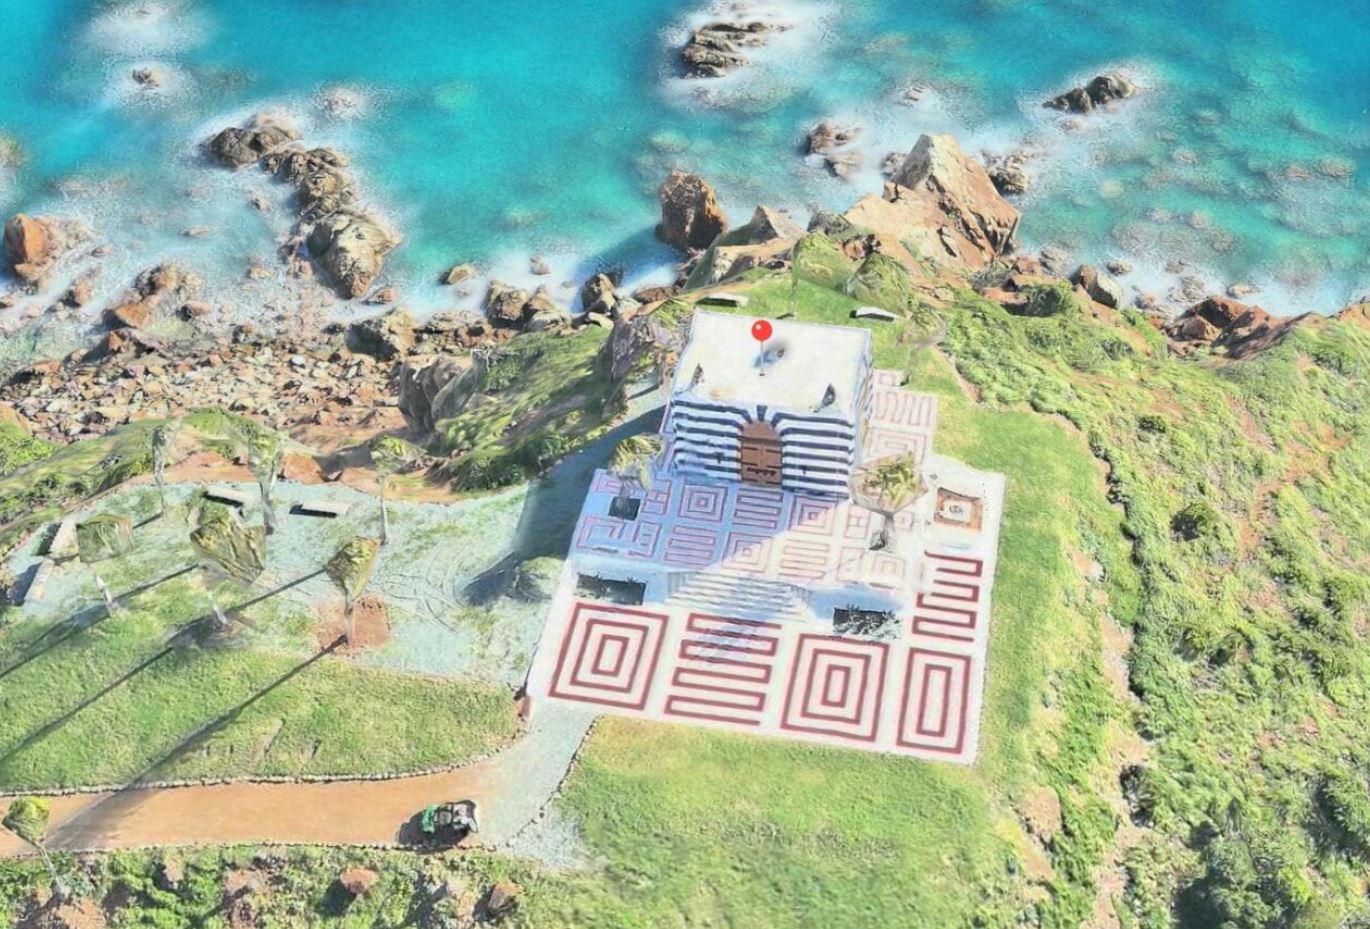 The creepiest photos of the Jeffrey Epstein island: You need to see these